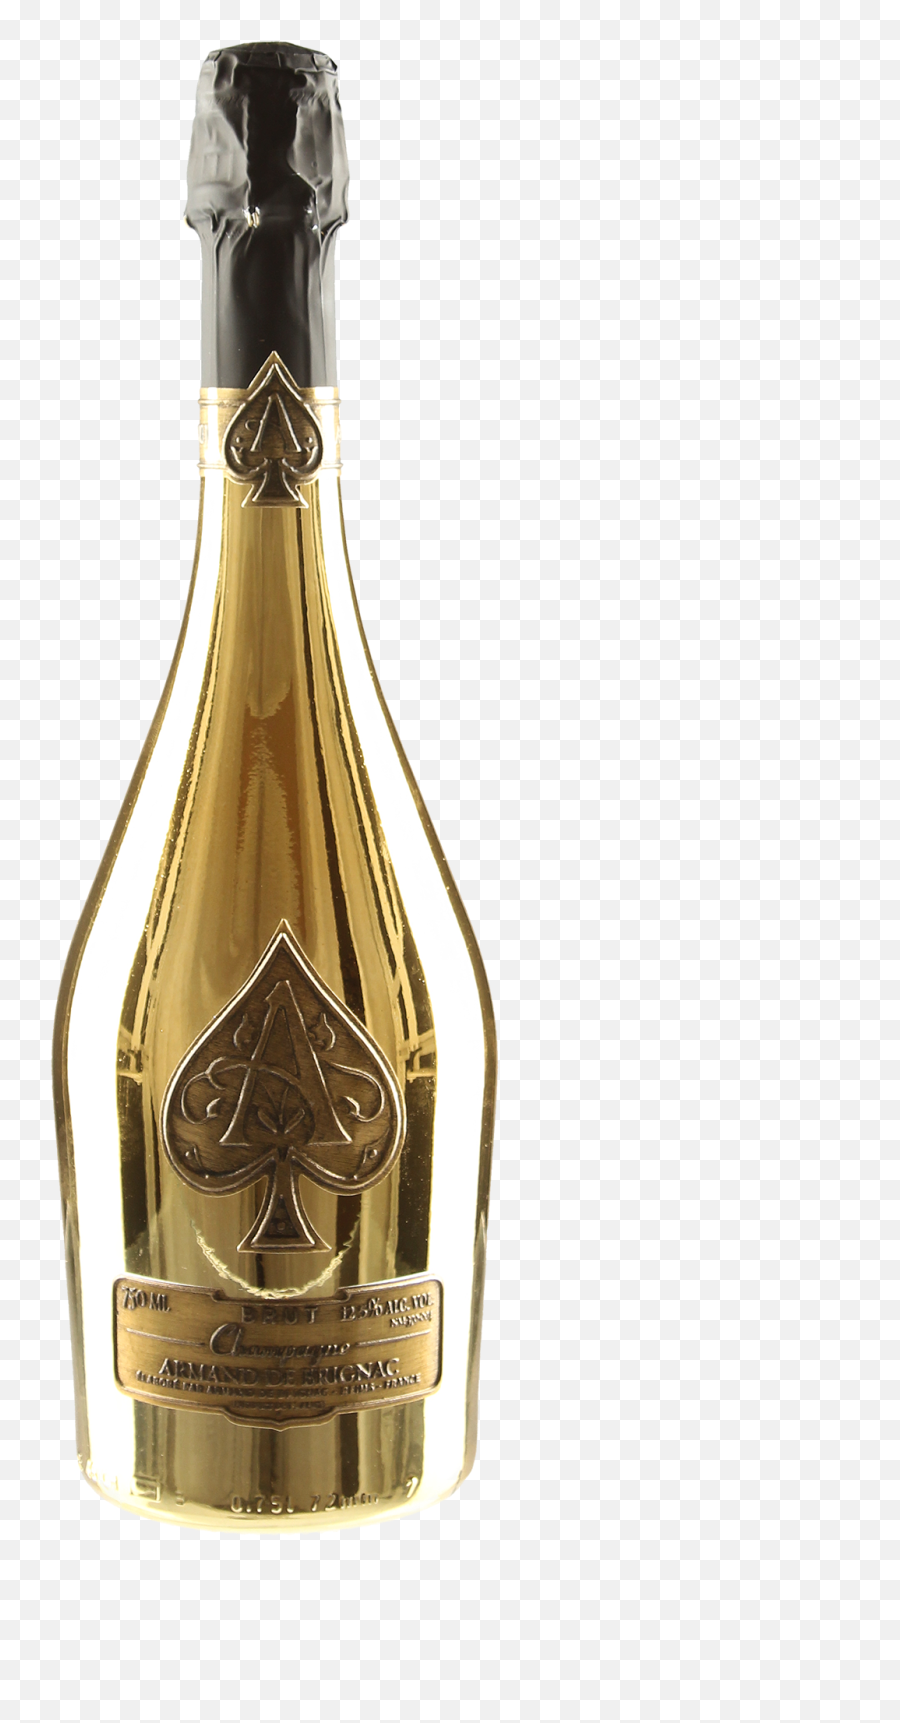 Download Champagne Brut Ace Of Spades - Ace Of Spades Champagne Png Emoji,Champaign Emoji